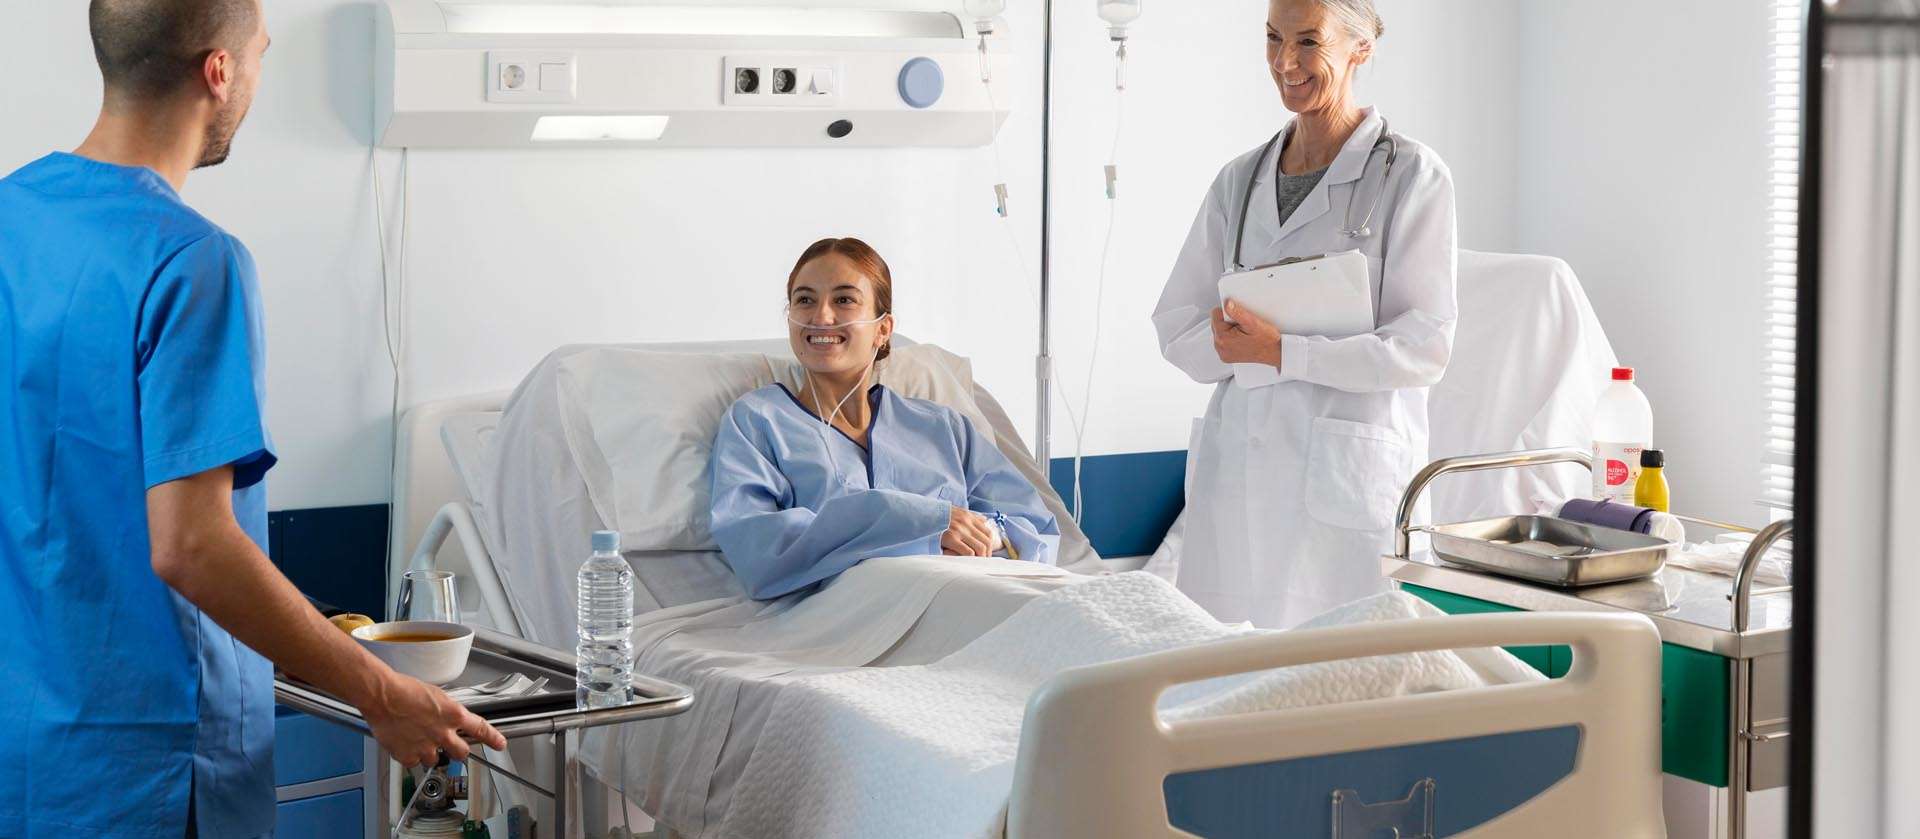 Importance of Furniture in hospitals